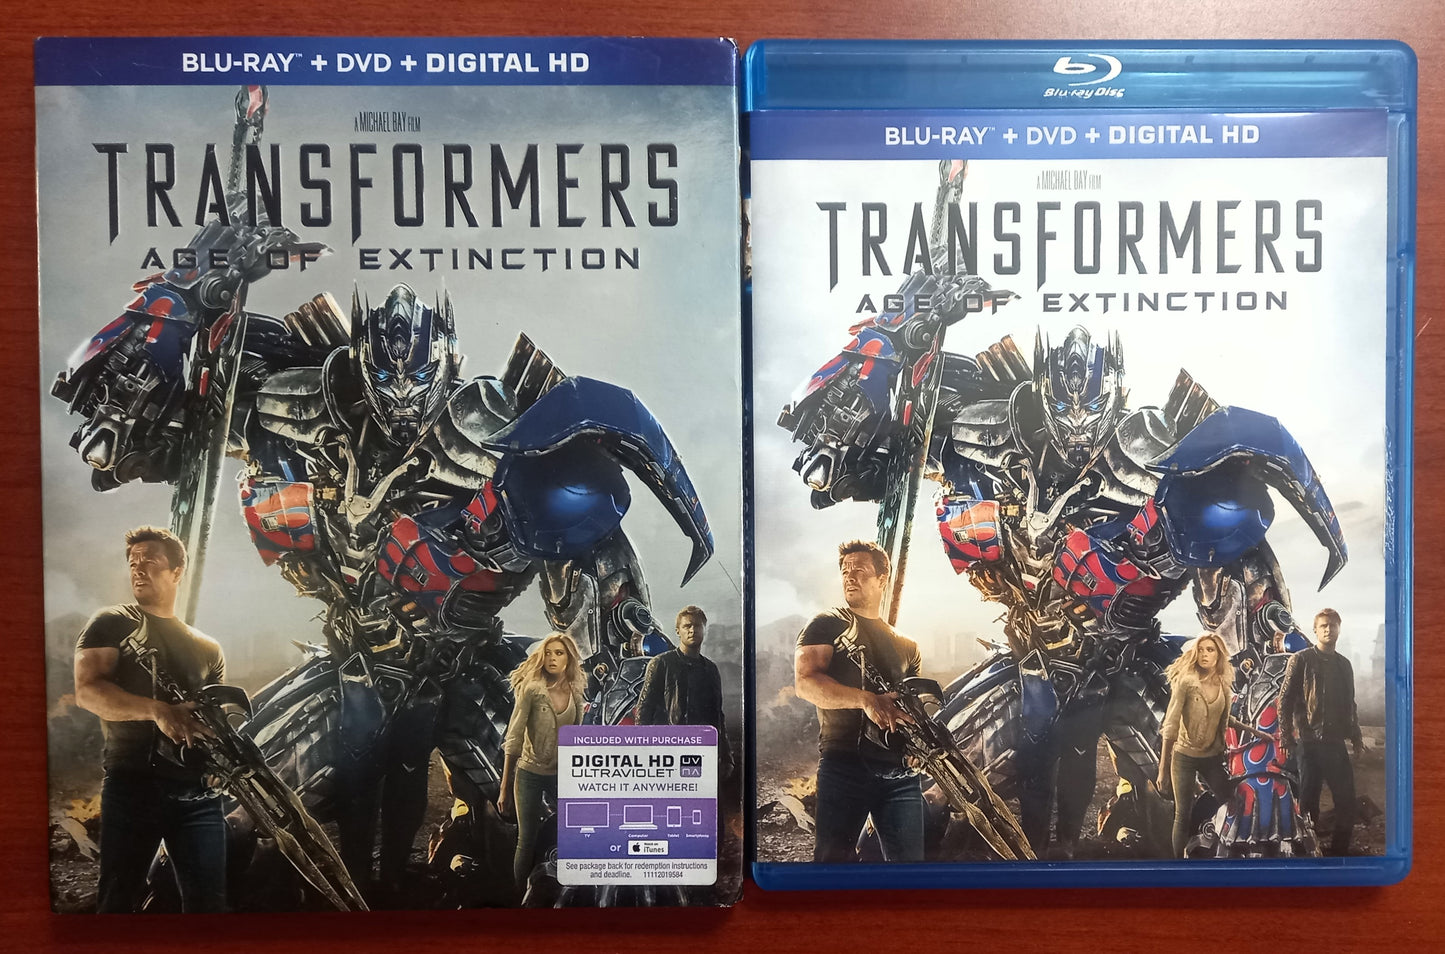 Transformers: Age of Extinction (Blu-ray Combo Pack)